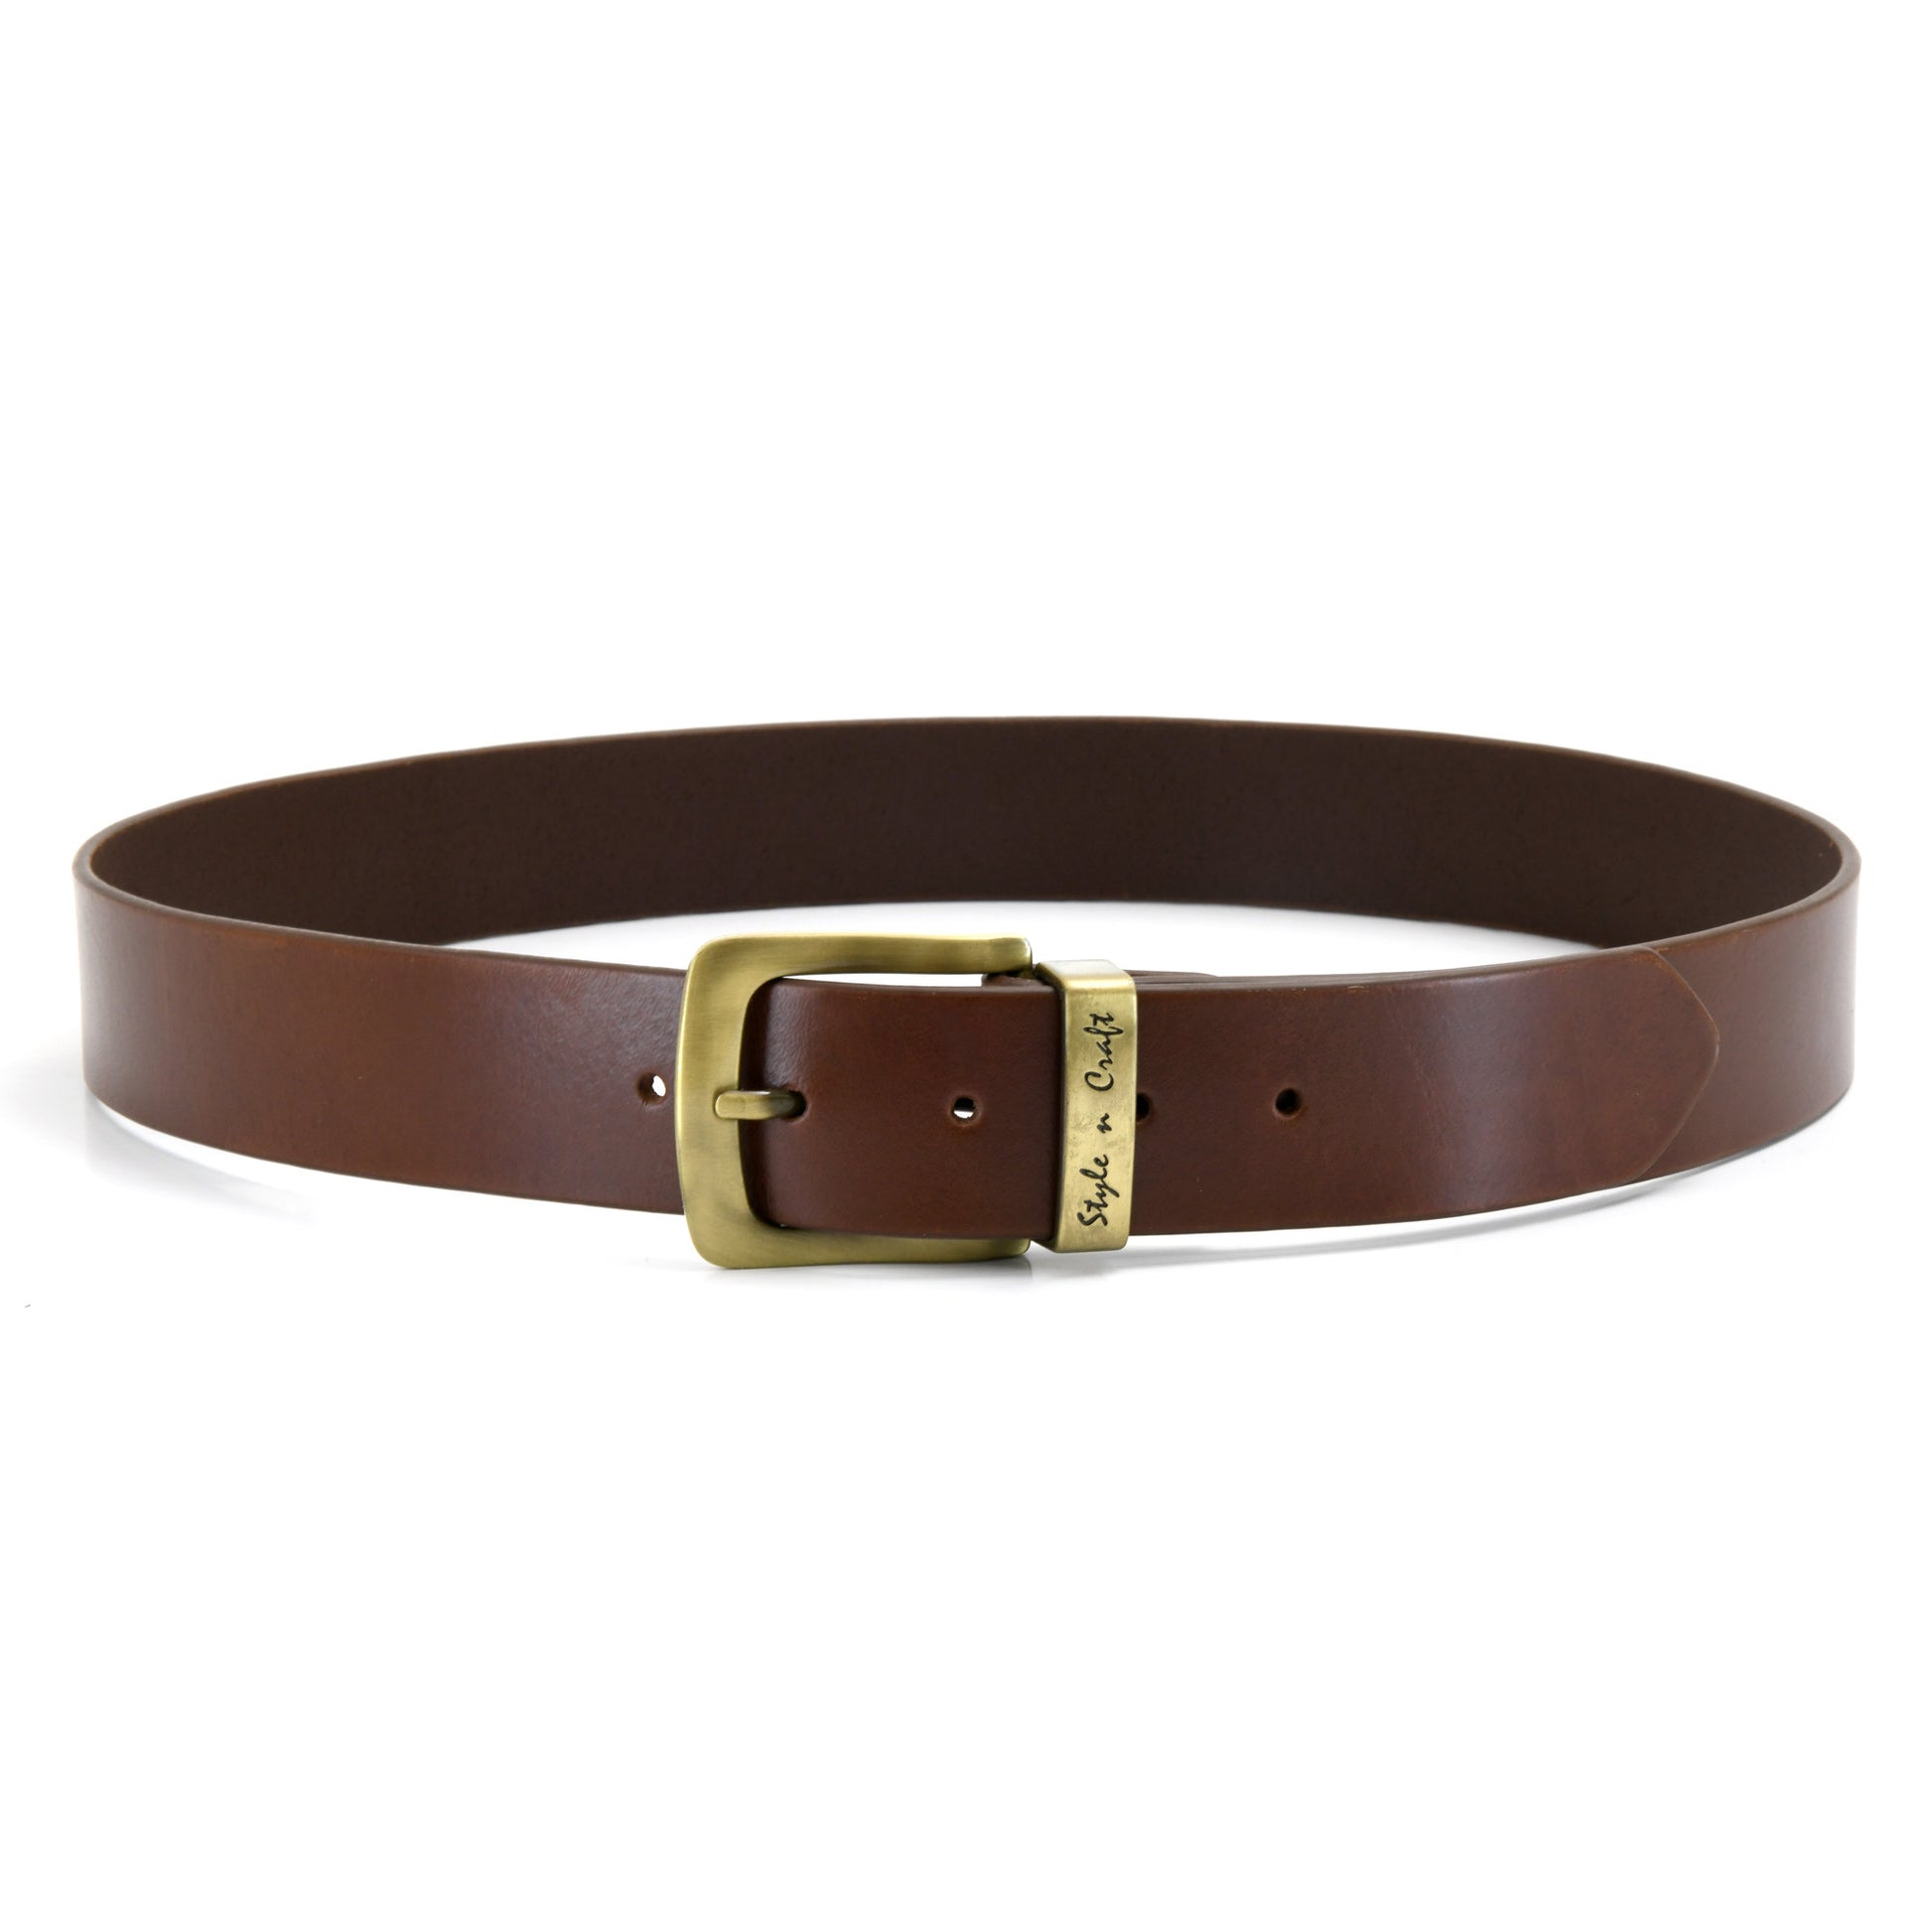 Dark Tan Leather Belt with Matte Gold Buckle | Style n Craft